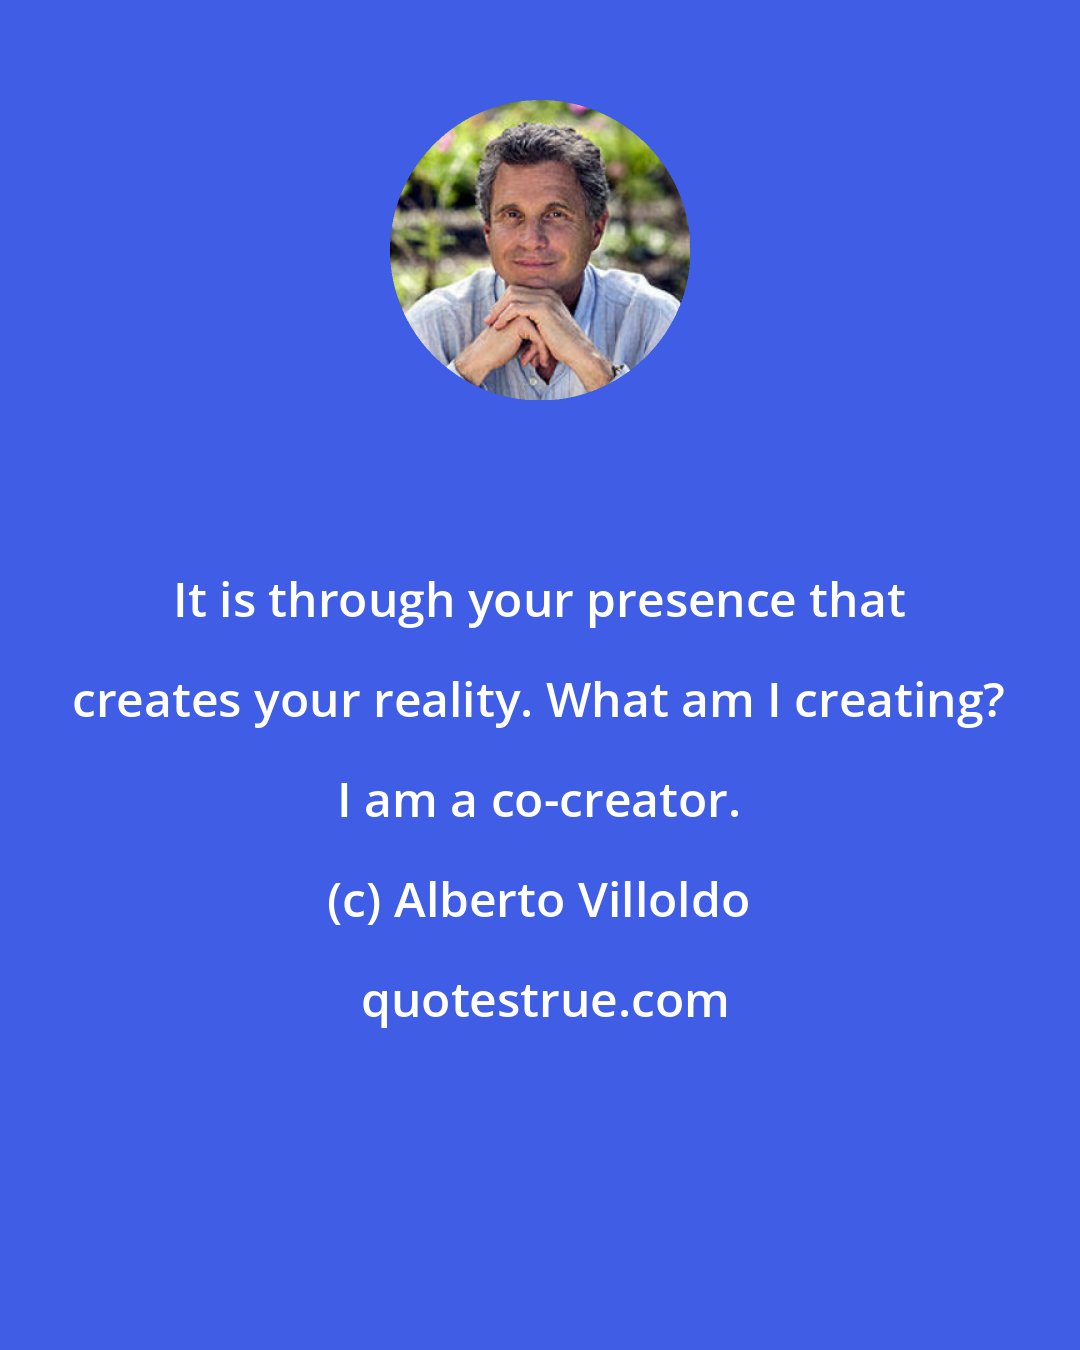 Alberto Villoldo: It is through your presence that creates your reality. What am I creating? I am a co-creator.